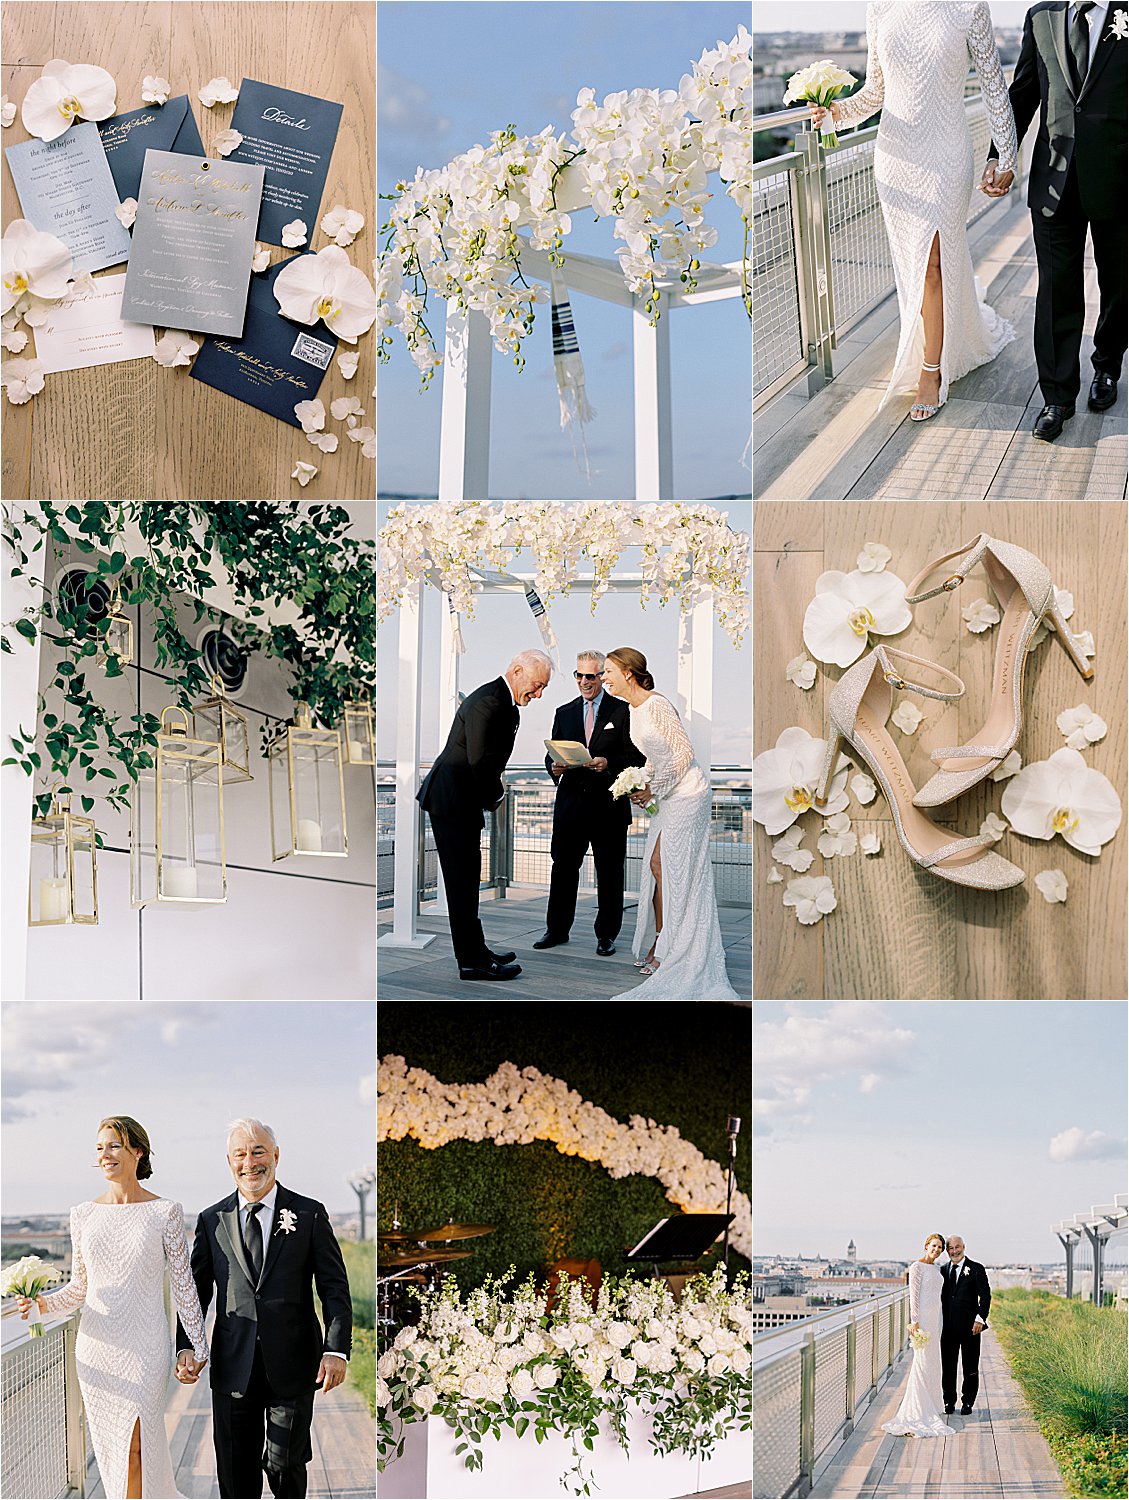 Fall Rooftop Wedding at the International Spy Museum in DC with DC + Destination Film Wedding Photographer, Renee Hollingshead with A. Griffin Events.